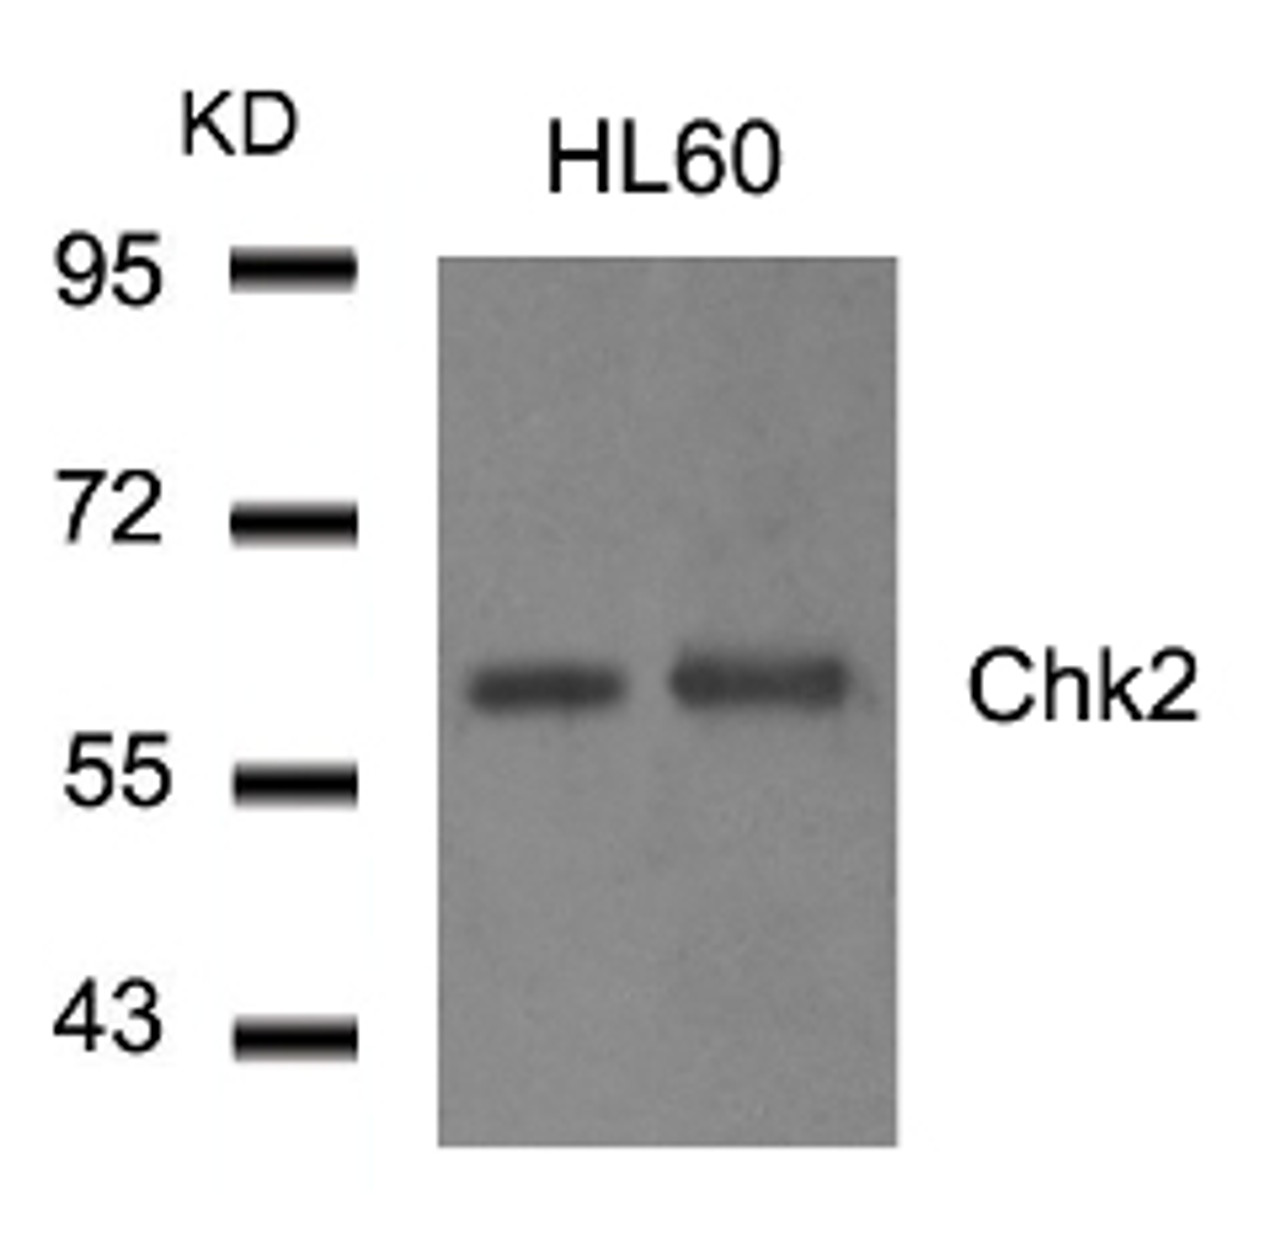 Western blot analysis of extract from HL60 cells using Chk2 (Ab-516) .